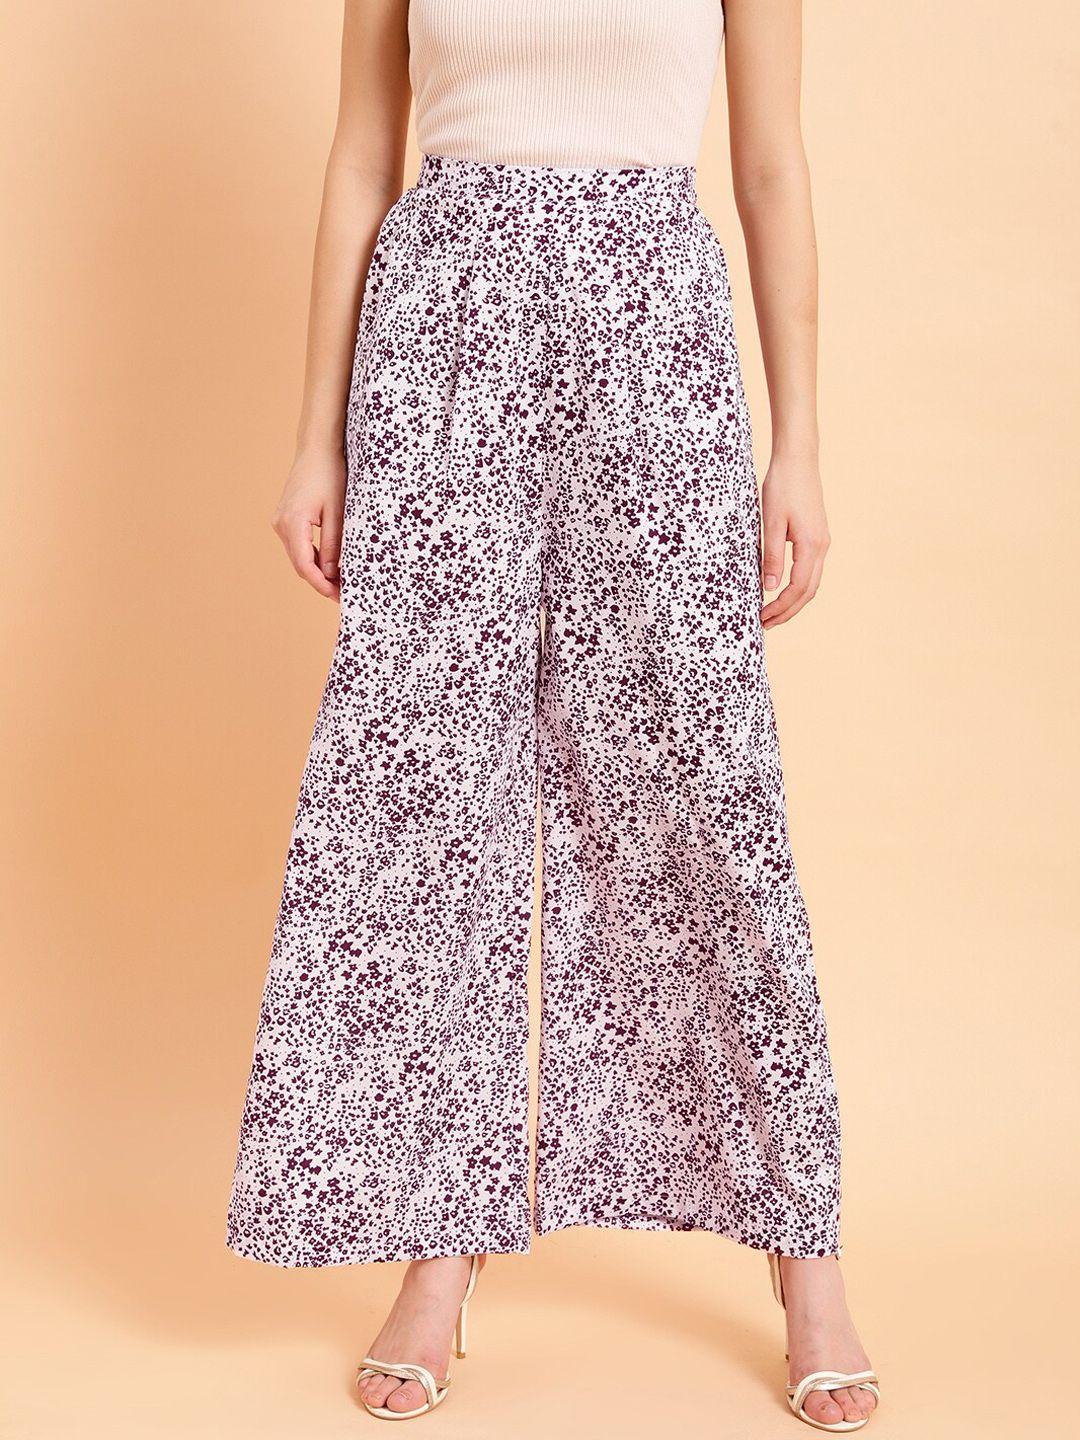 mint street women floral printed mid rise plain parallel trousers